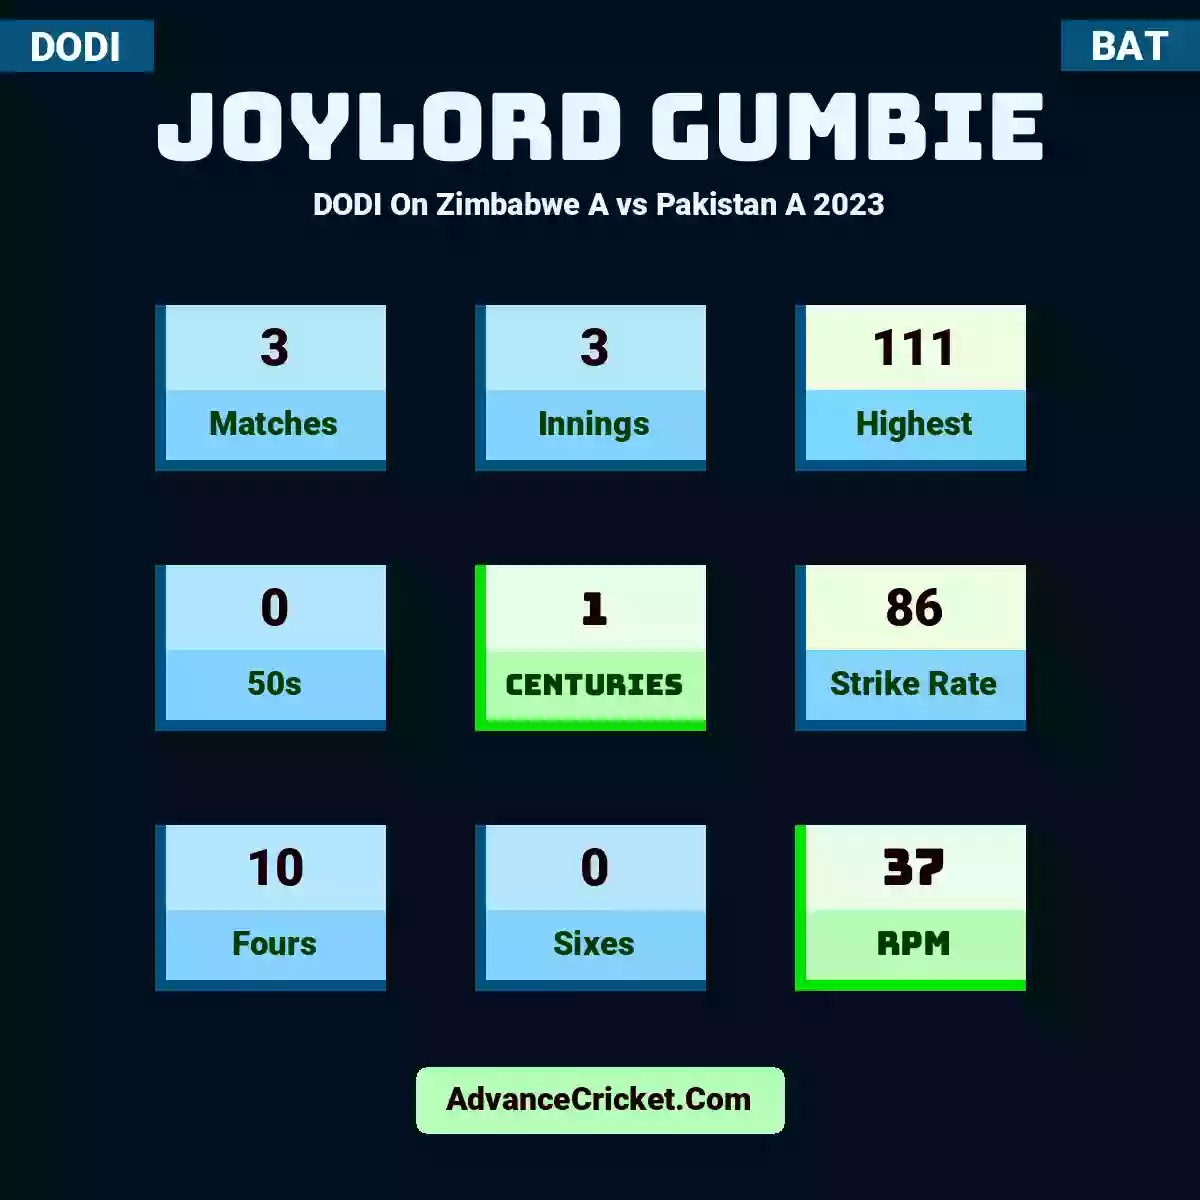 Joylord Gumbie DODI  On Zimbabwe A vs Pakistan A 2023, Joylord Gumbie played 3 matches, scored 111 runs as highest, 0 half-centuries, and 1 centuries, with a strike rate of 86. J.Gumbie hit 10 fours and 0 sixes, with an RPM of 37.